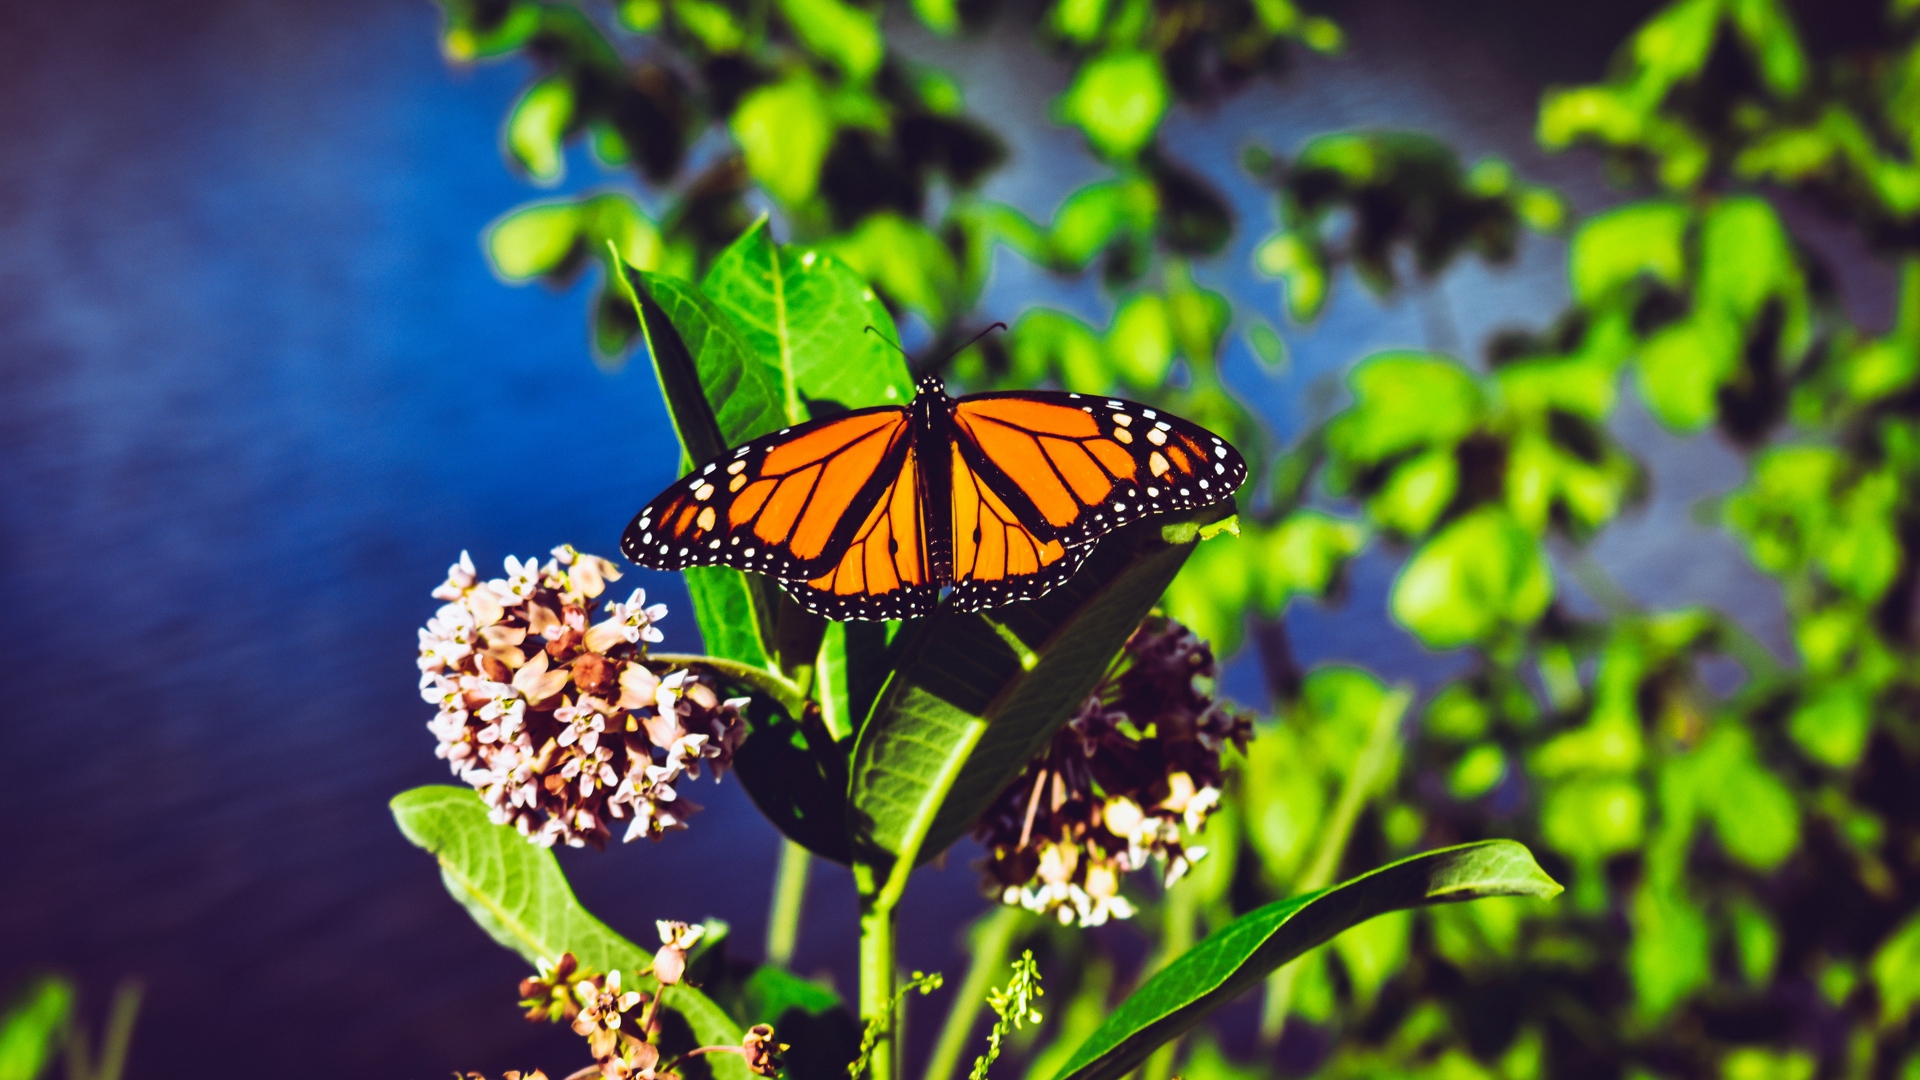 Wallpaper Monarch Butterfly, Butterfly, Bright, Patterns, - Angangueo - HD Wallpaper 